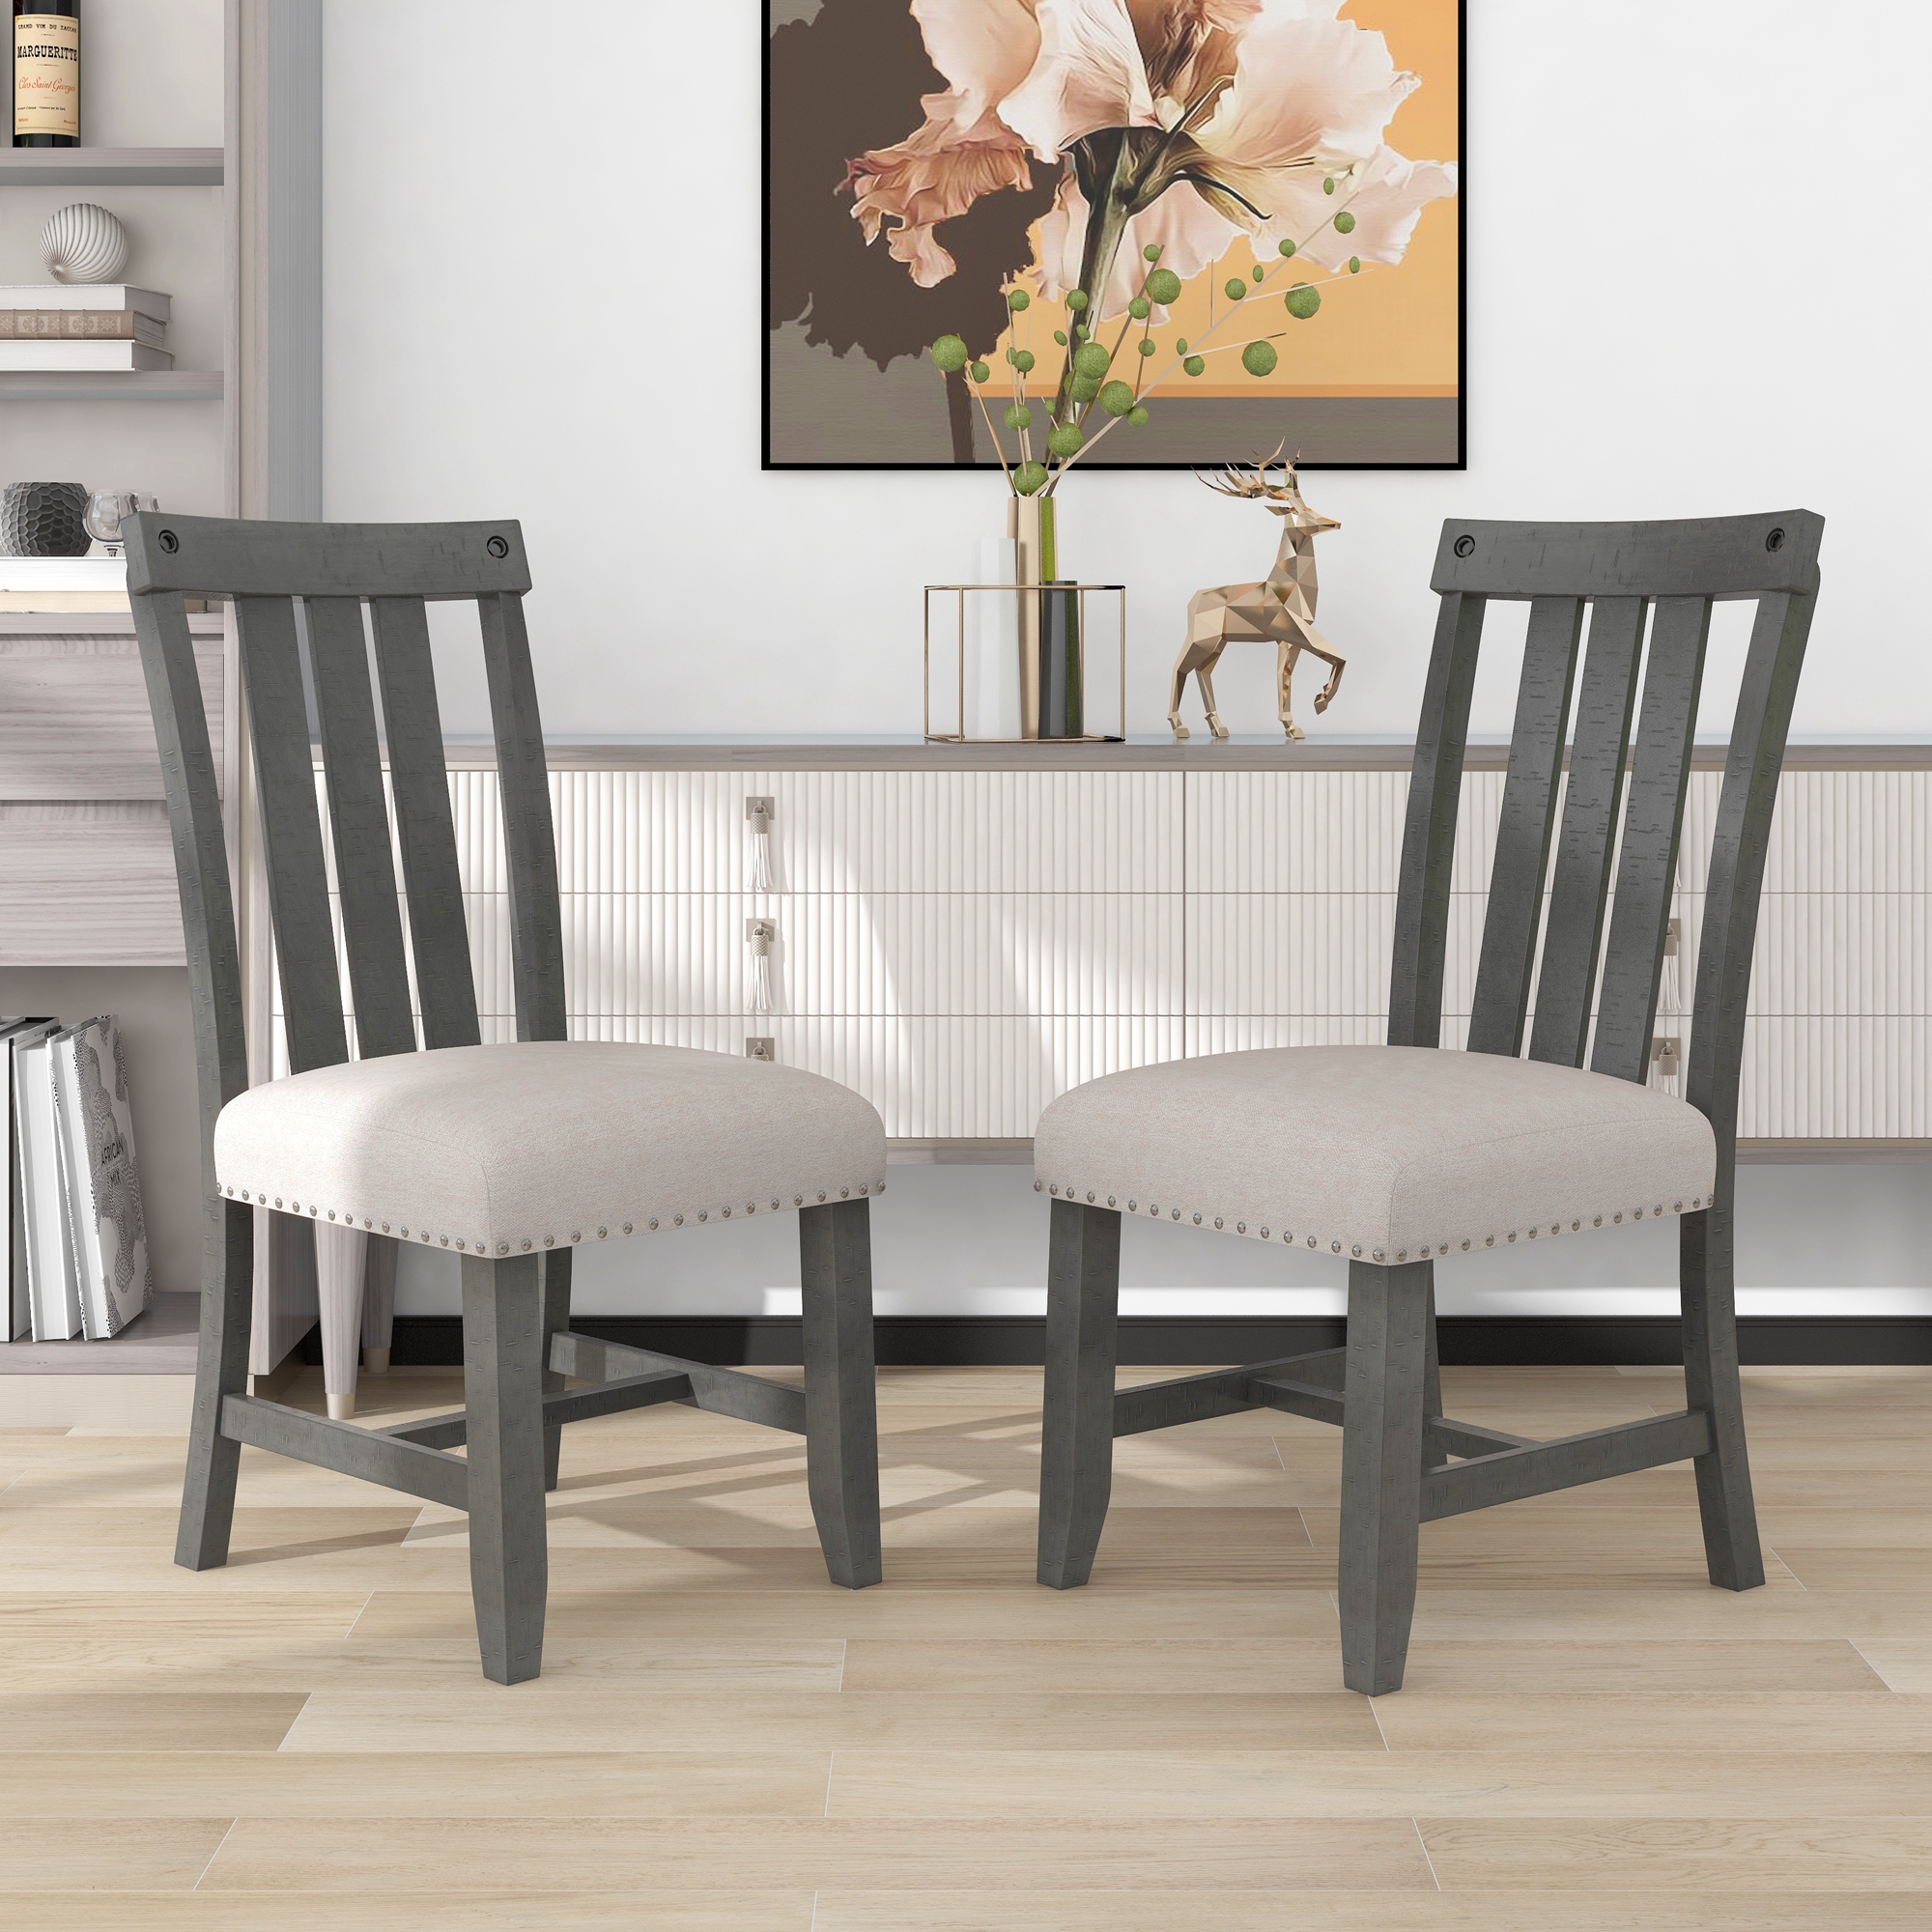 TREXM Set of 2 Fabric Upholstered Dining Chairs with Sliver Nails and Solid Wood Legs (Gray)